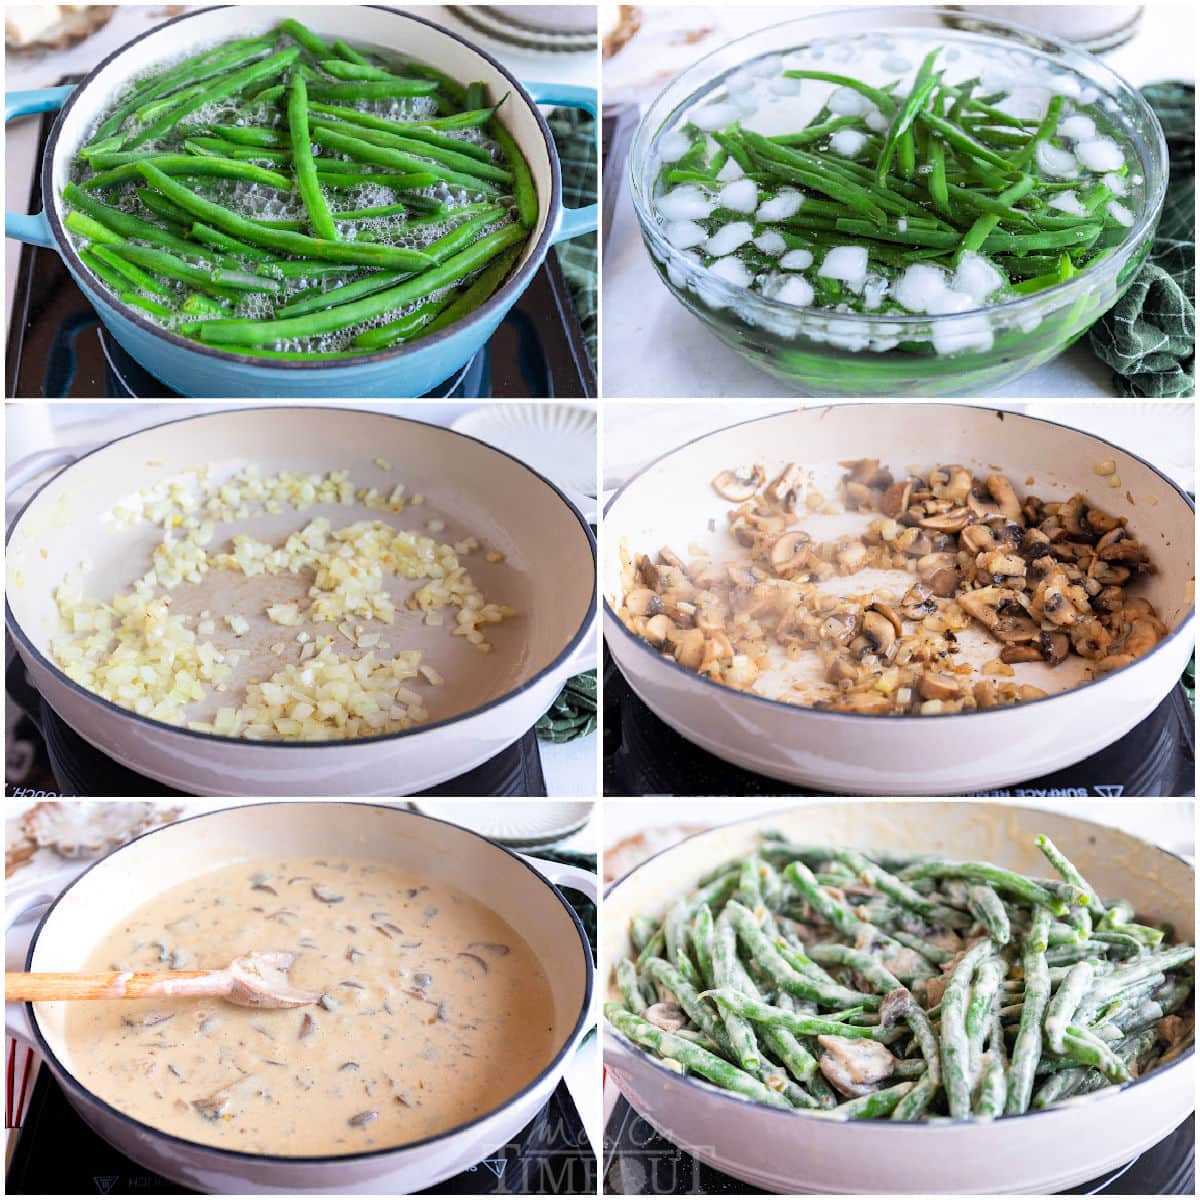 six image collage showing how to make green bean casserole from scratch with step by step process photos.